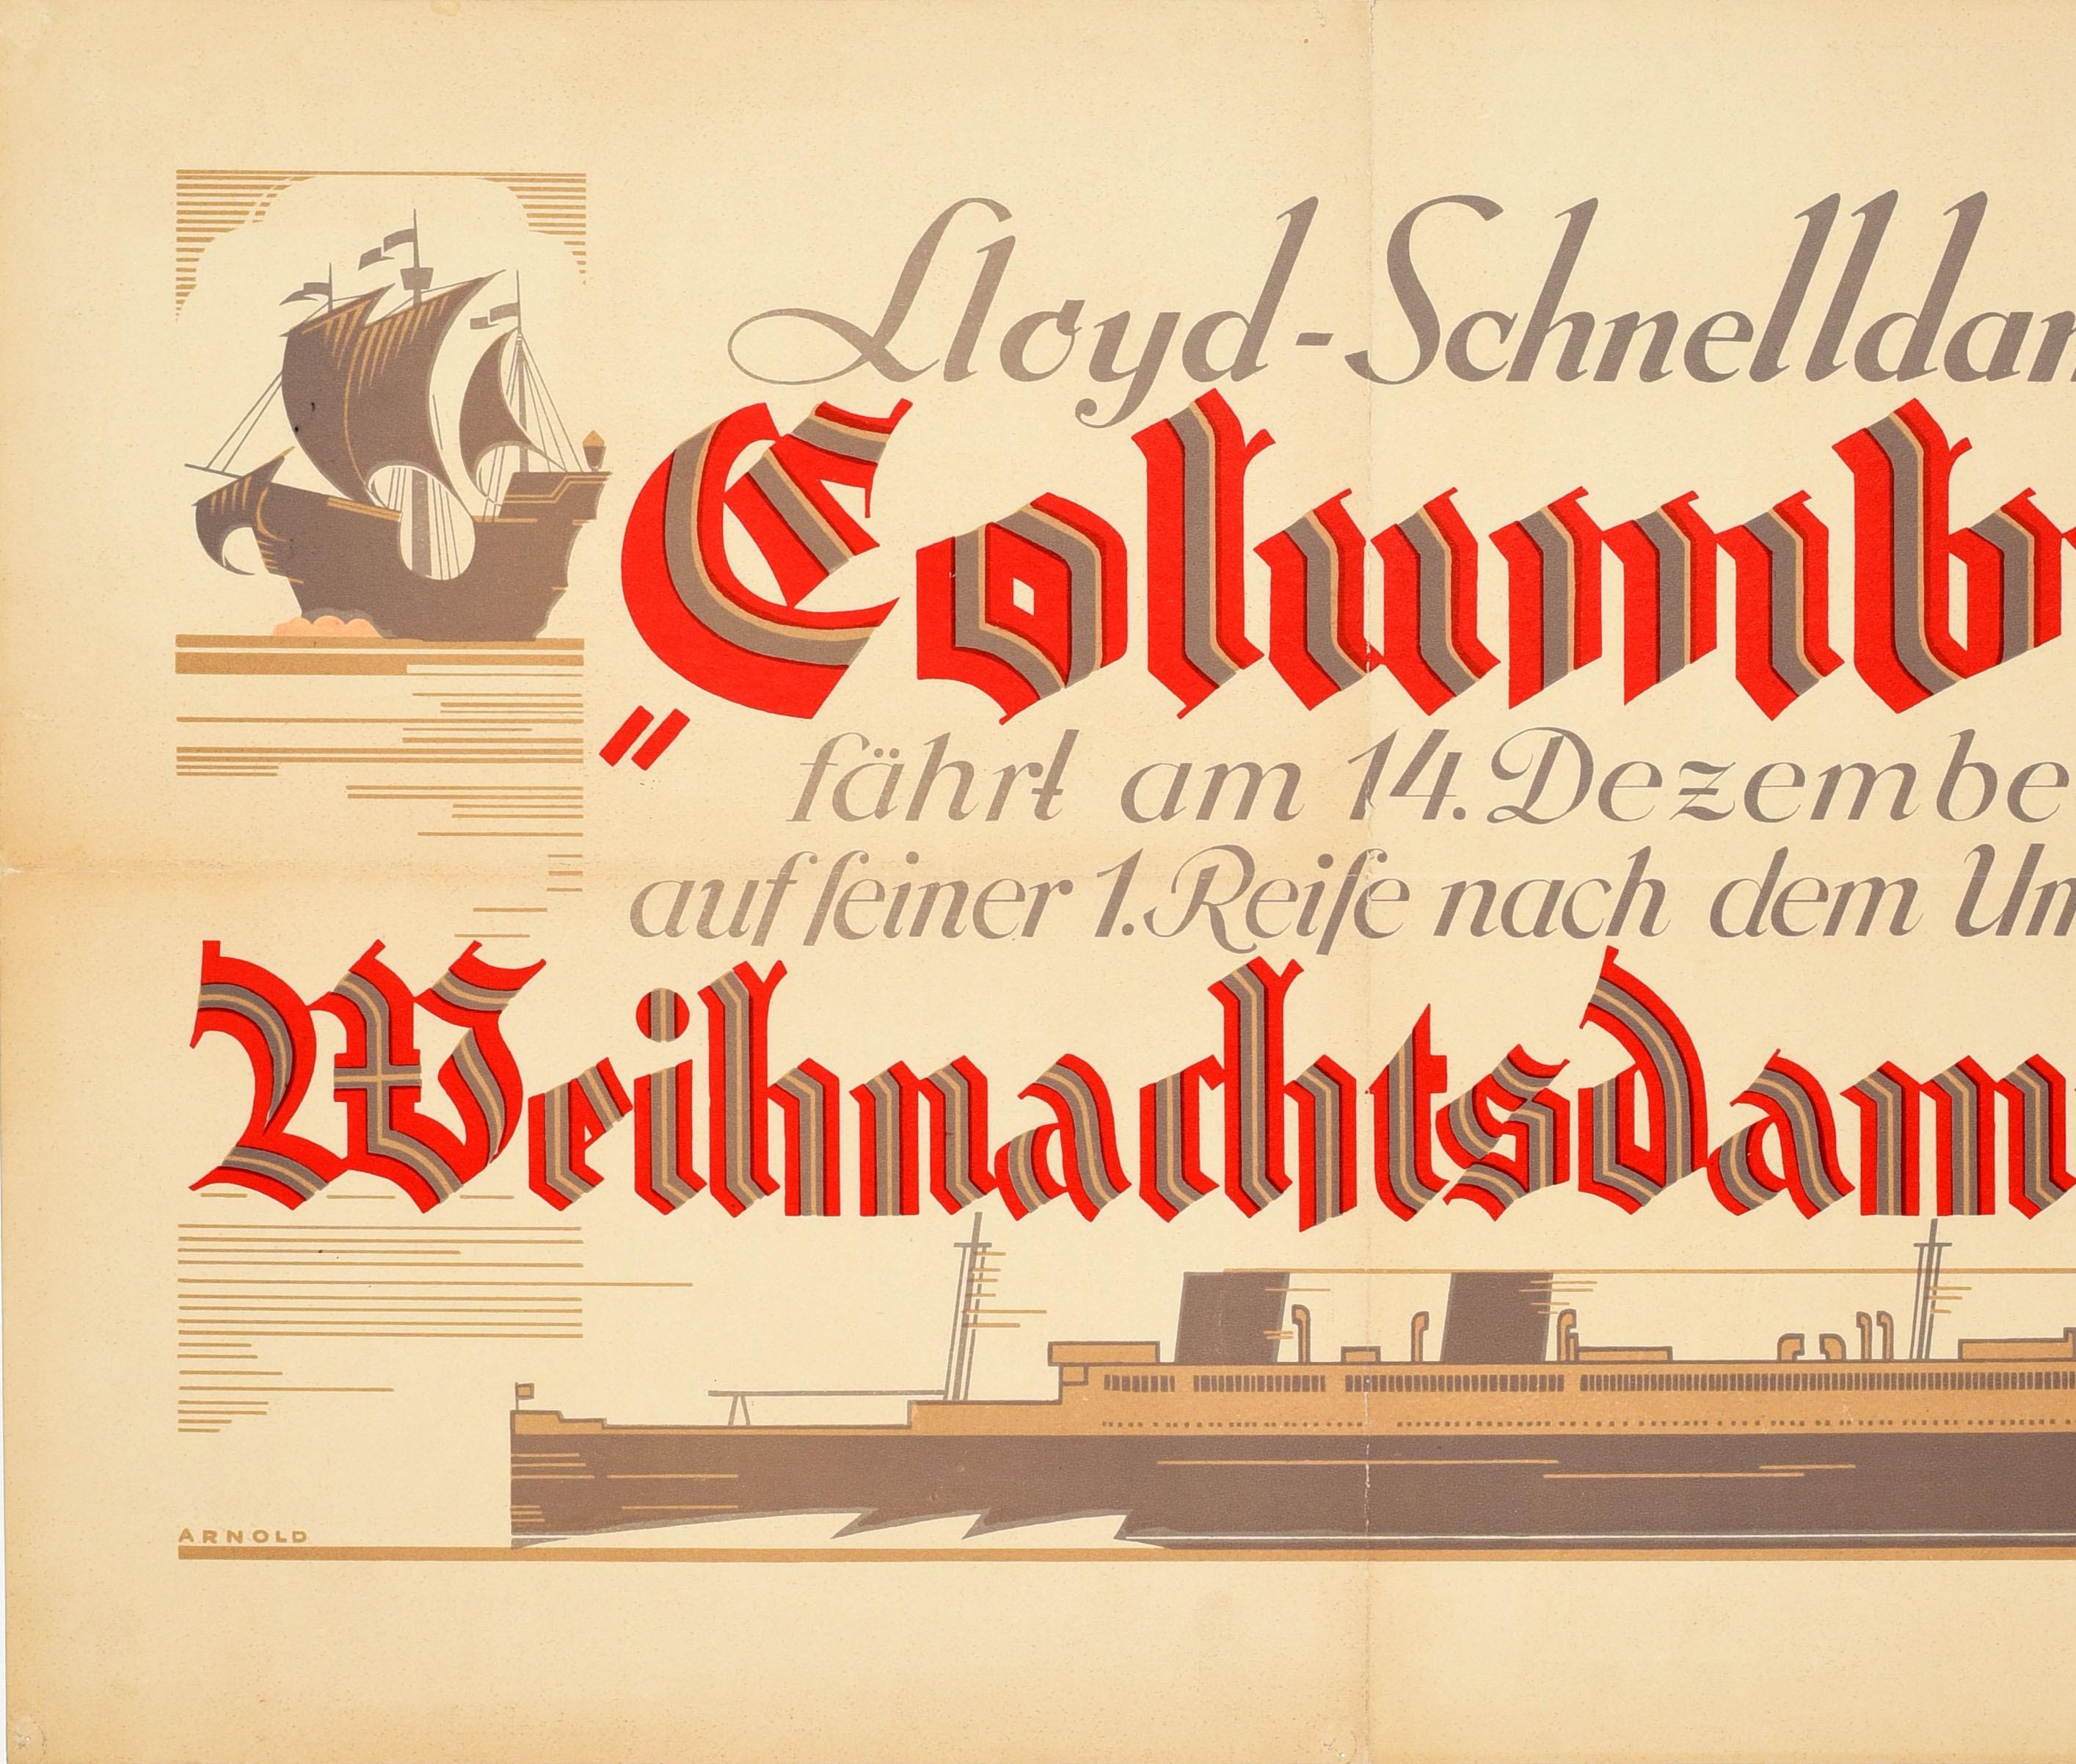 Original vintage shipping line cruise travel advertising poster for Lloyd Schnelldampfer Columbus Weihnachtsdampfer / fast Christmas steamer from 14 December 1929 featuring a great design in bold stylised lettering with an image of a tall ship